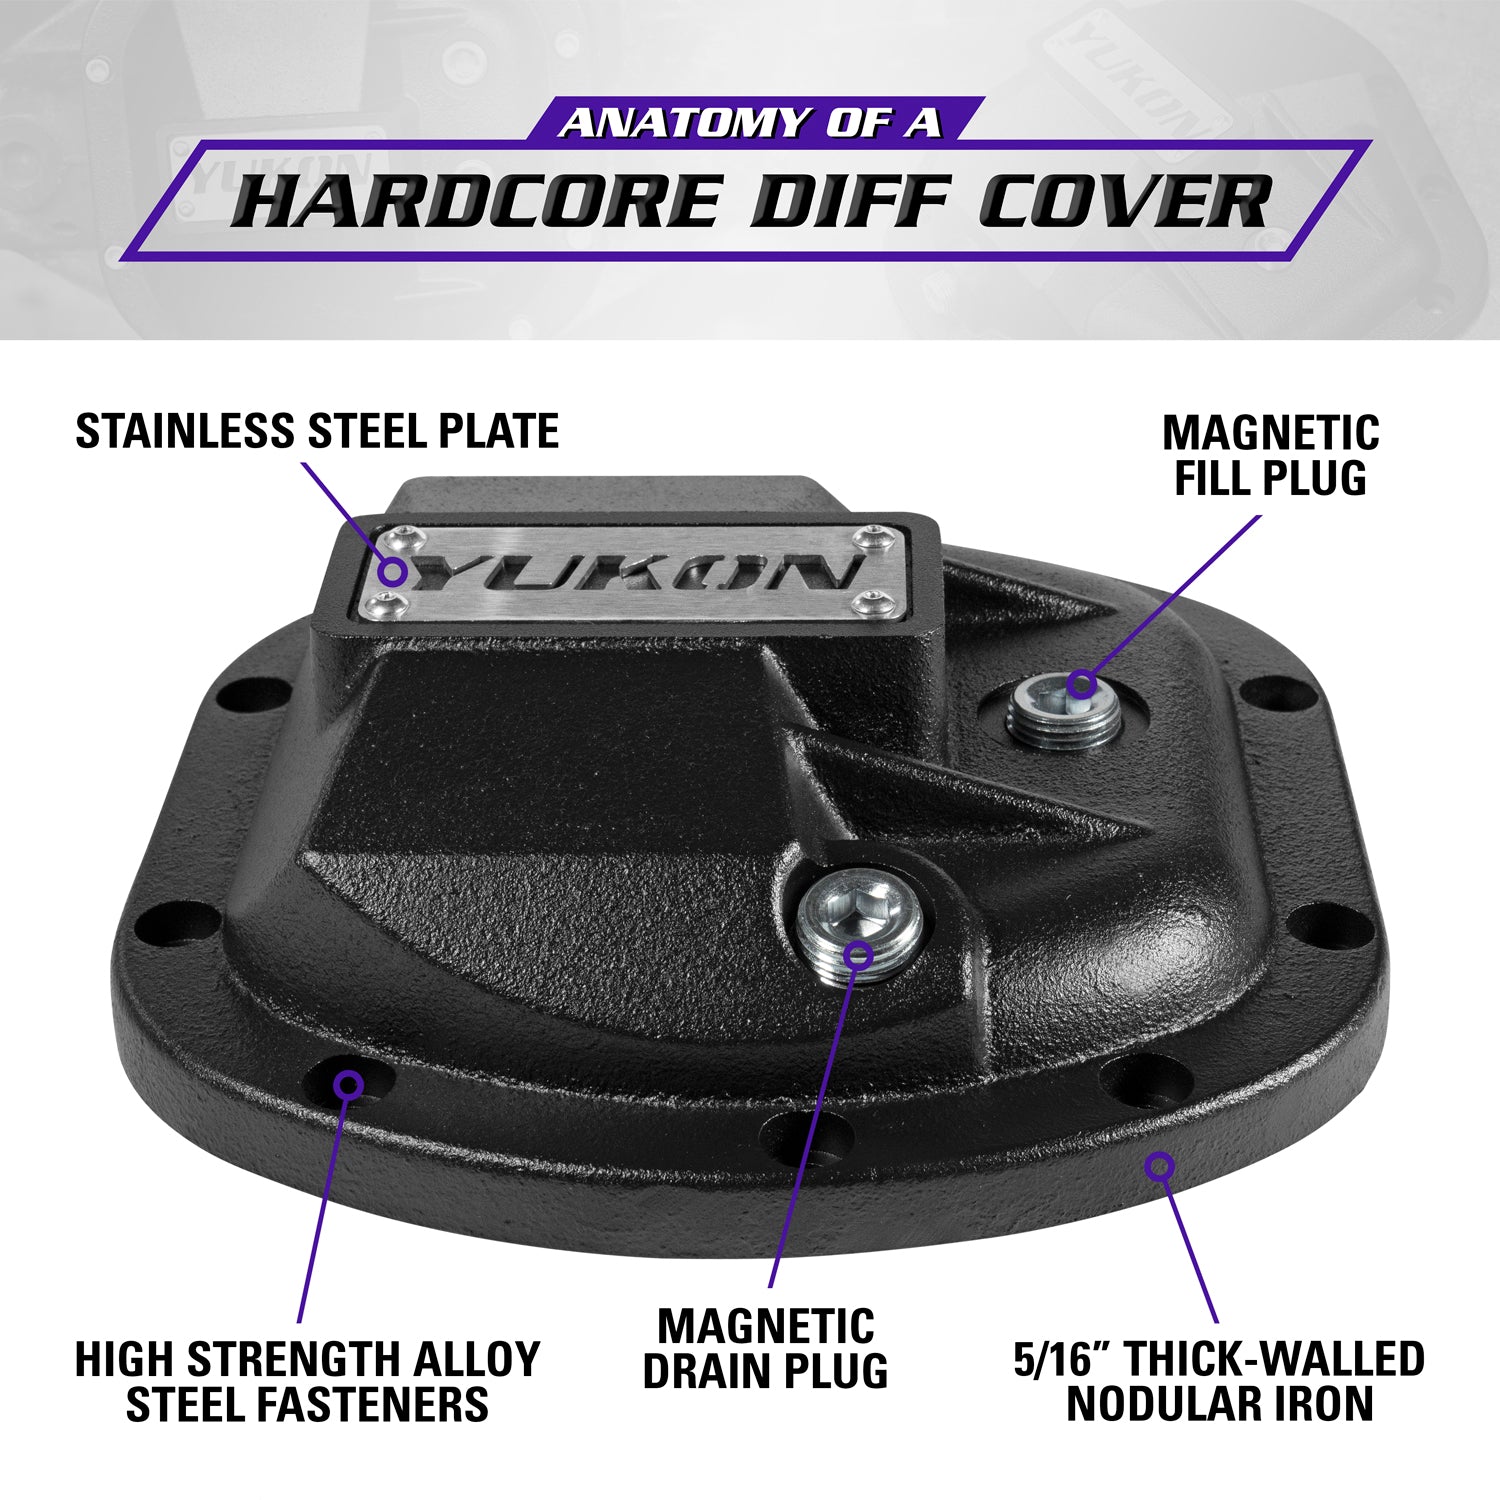 Yukon Gear Ford Jeep Differential Cover - Front YHCC-D30-PURPLE